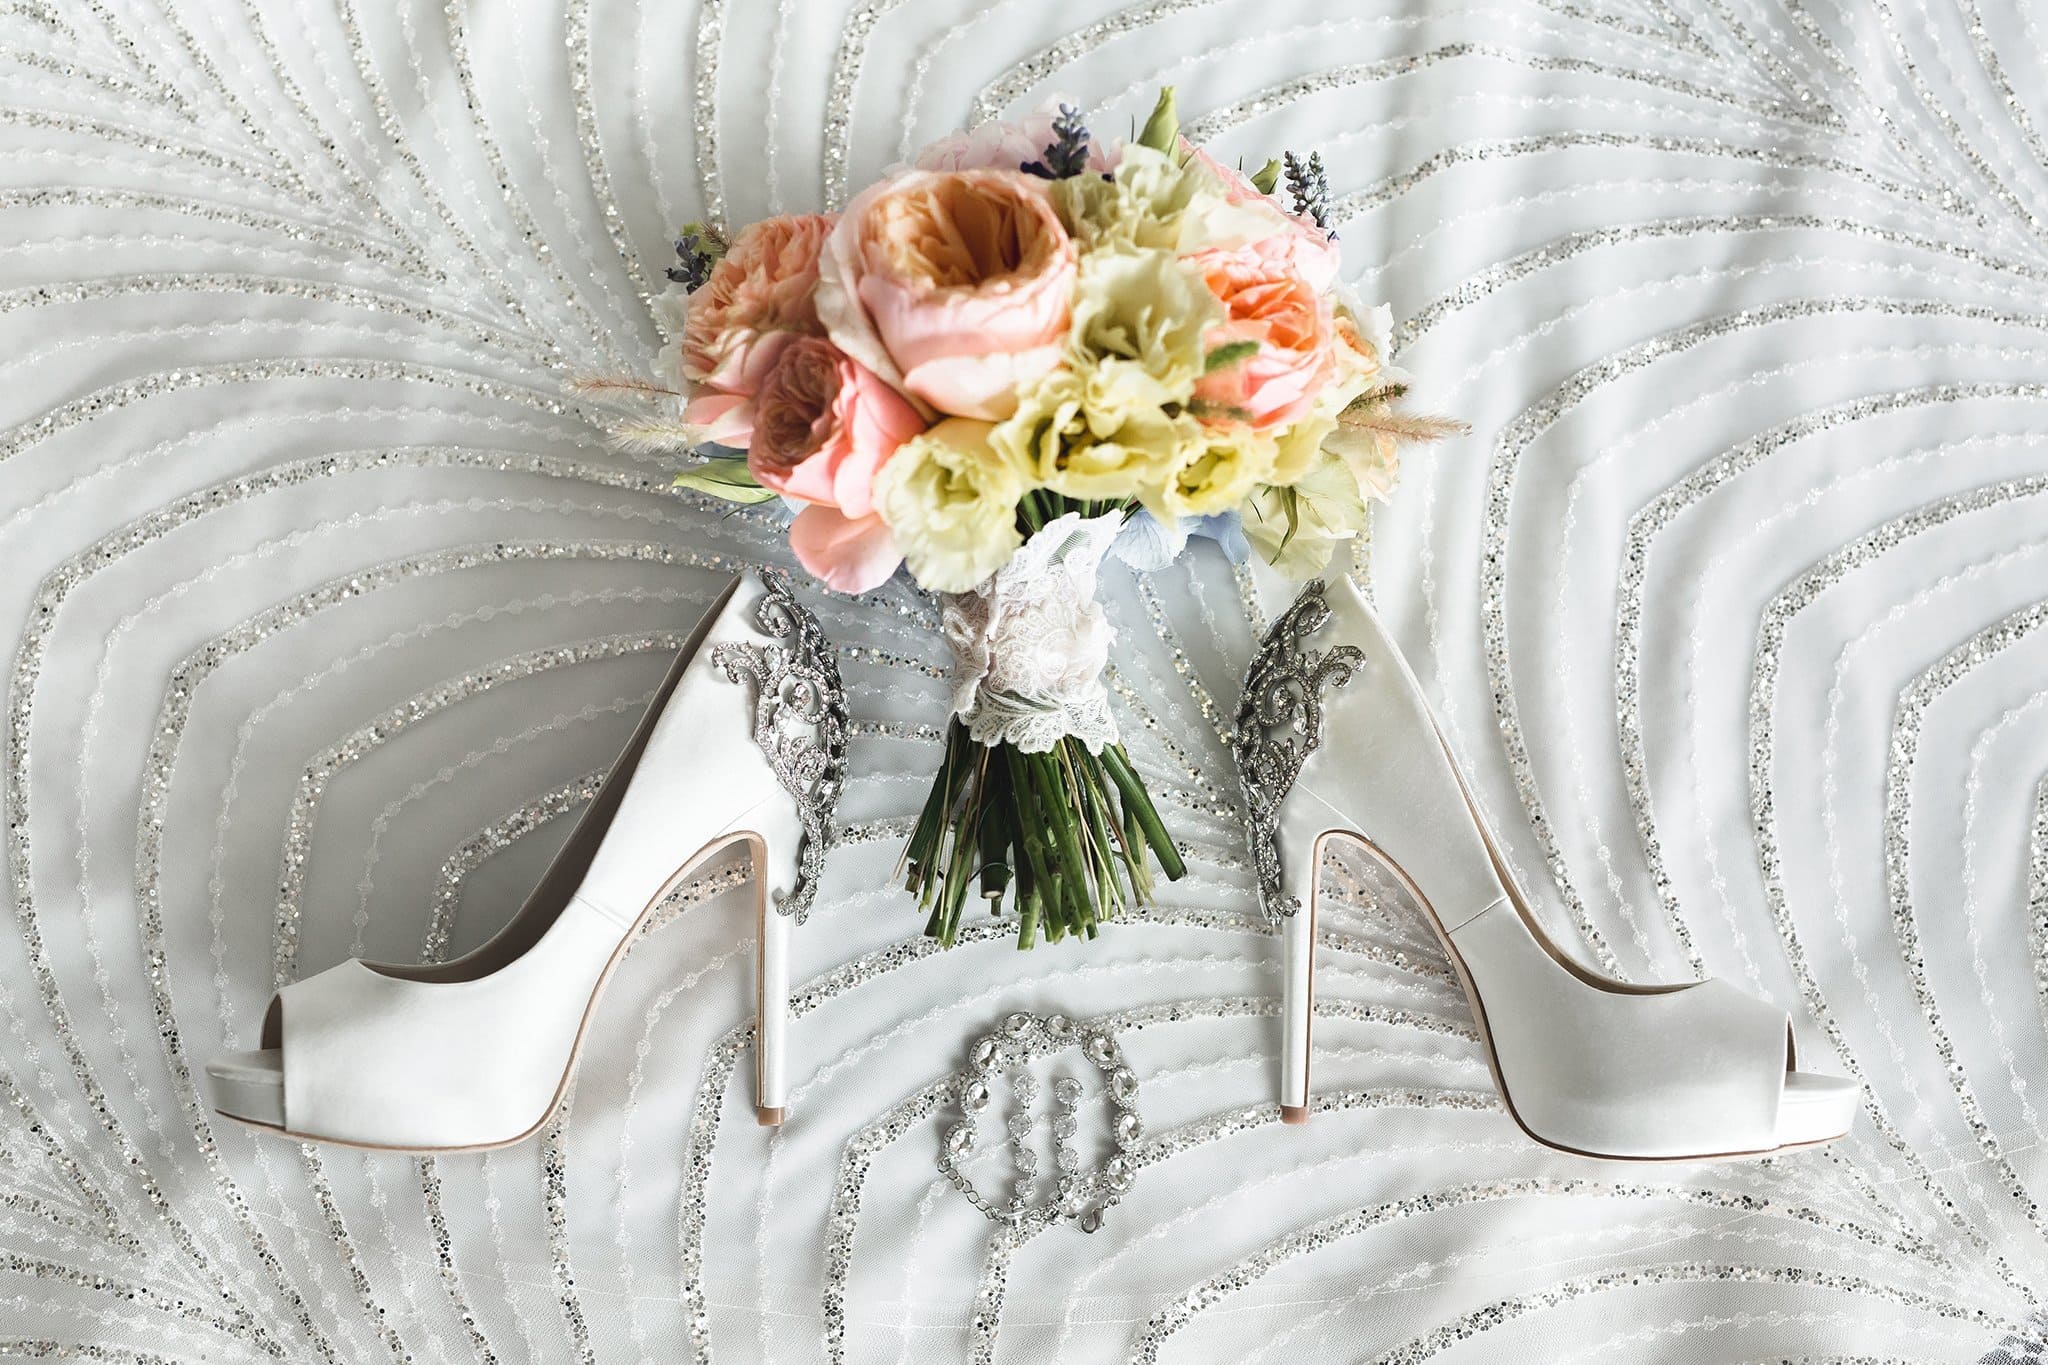 Satin is one of the most popular choices for wedding shoes among brides